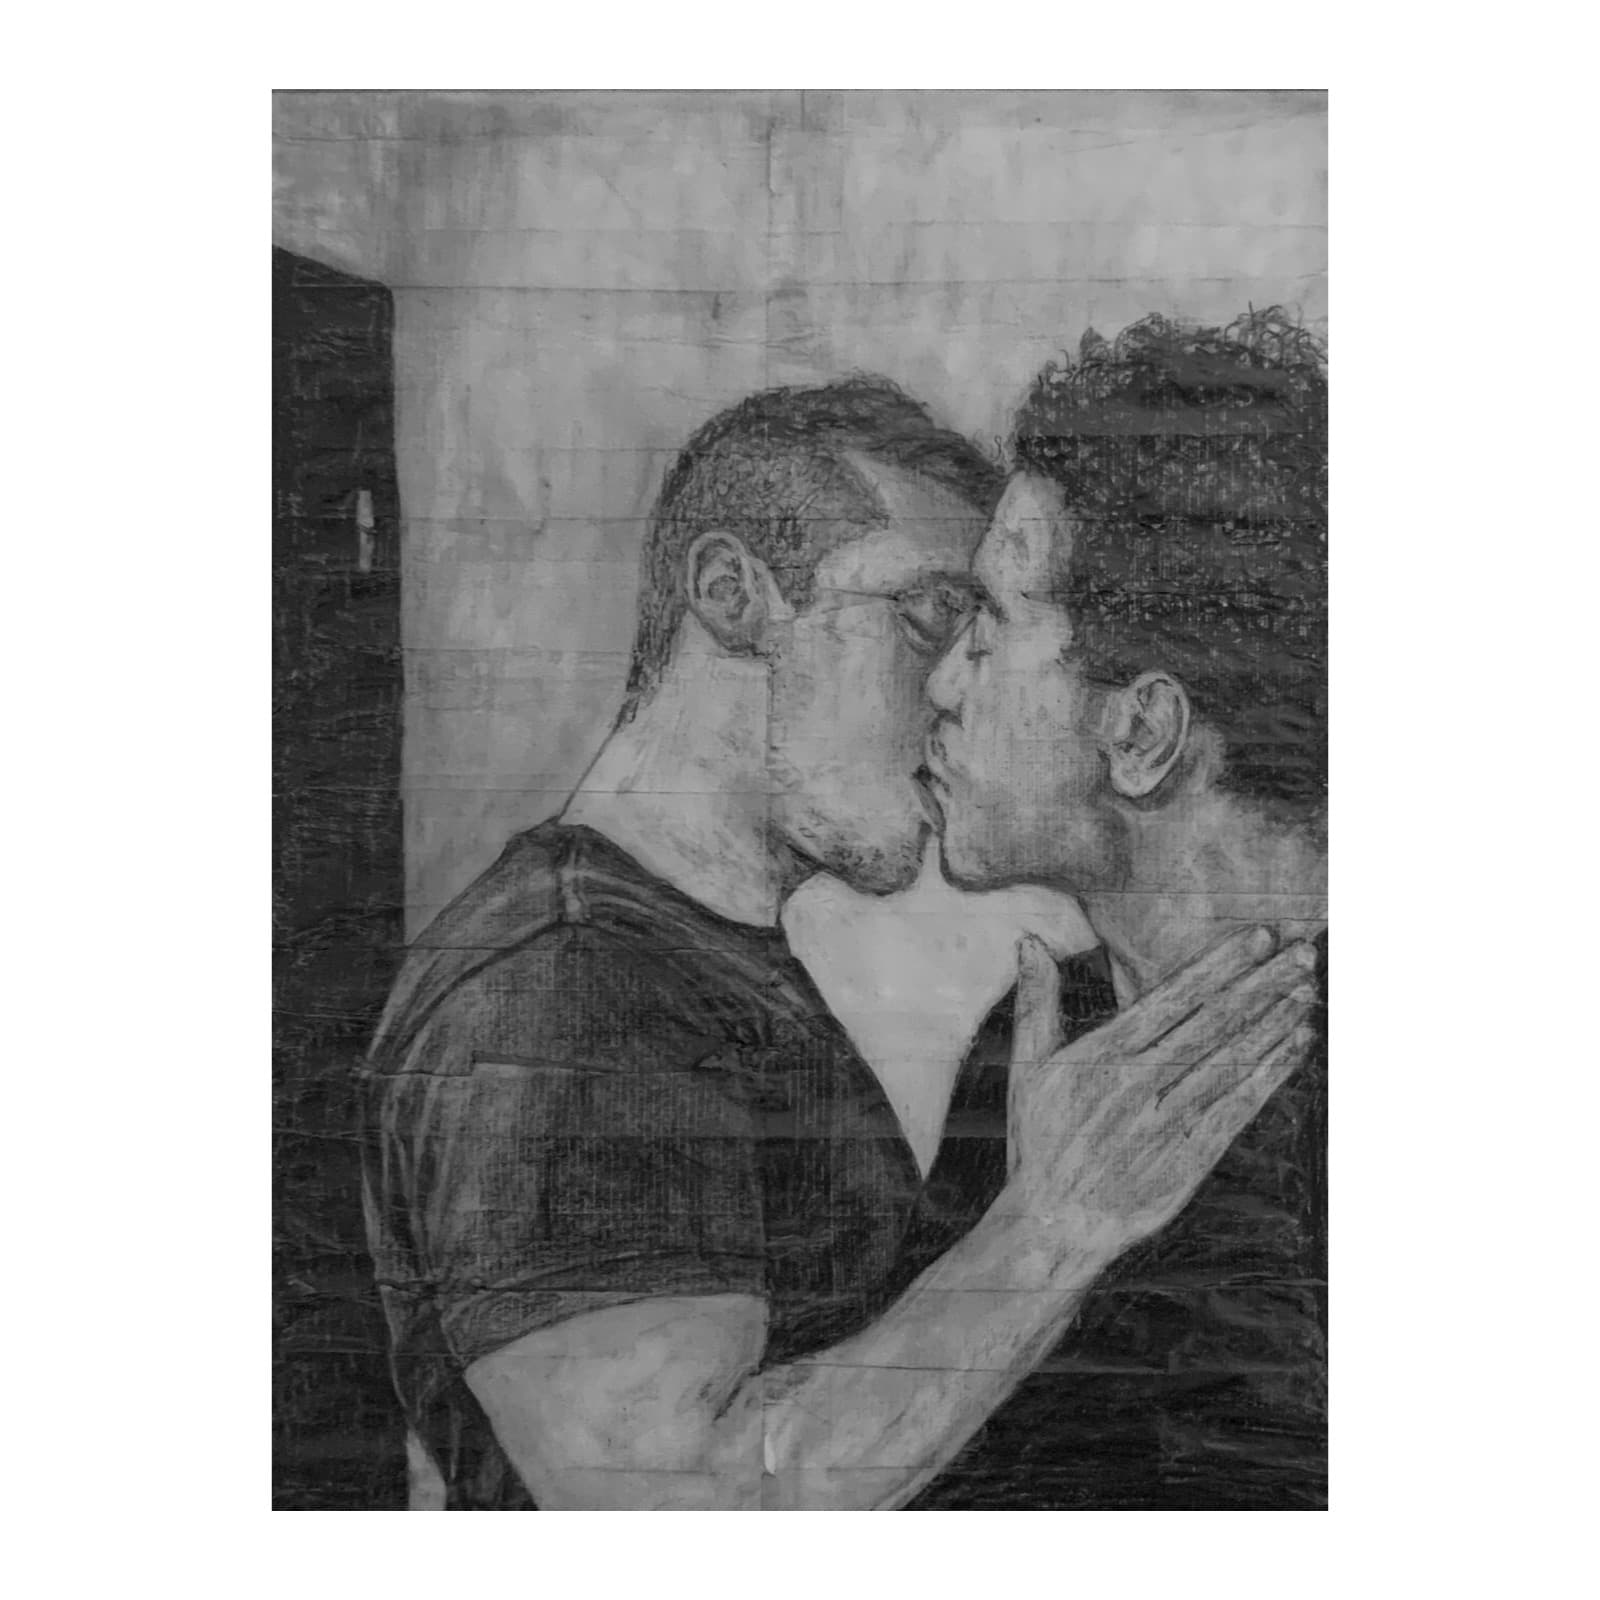 There is never more than a fag paper between them - Greg and Noah- Pencil Artwork on Cigarette Paper thumbnail-0